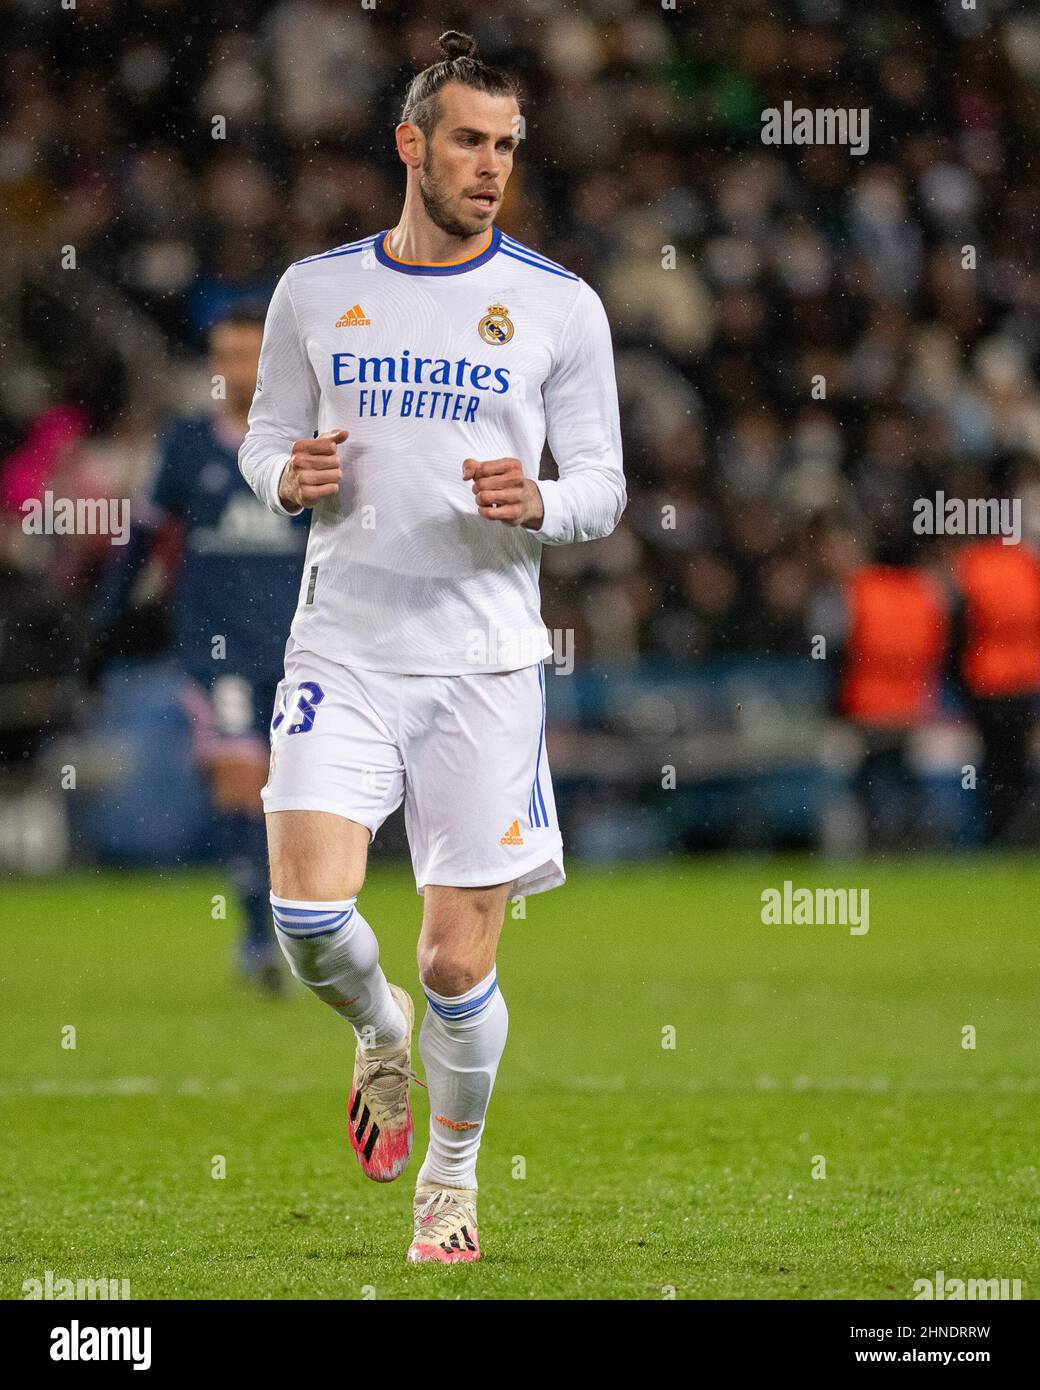 PARIS, FRANCE - FEBRUARY 15: Gareth Bale of Real Madrid prior to